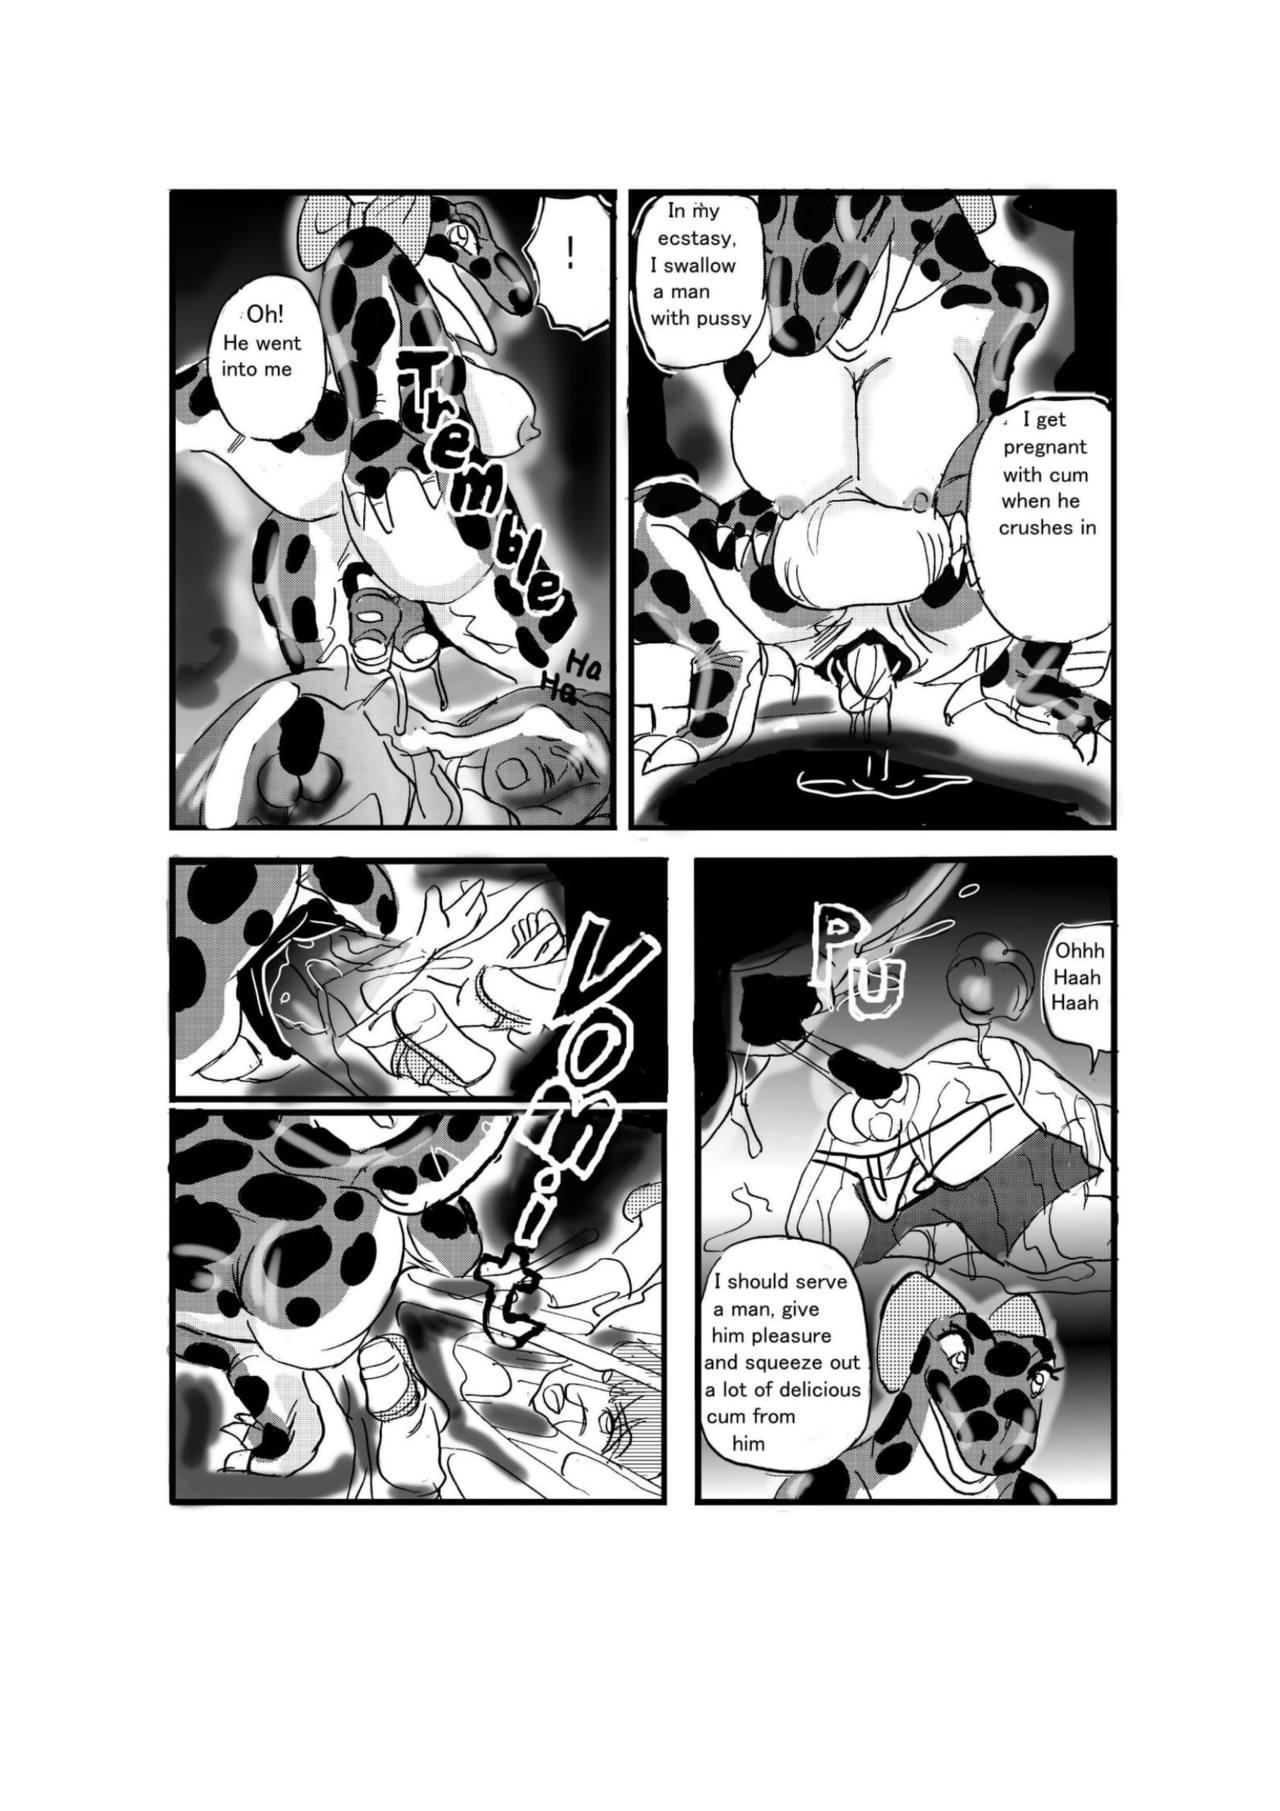 Best Blow Job Swallowed Whole vol.2 Waniko + What's Digestion? - Original Dominate - Page 6